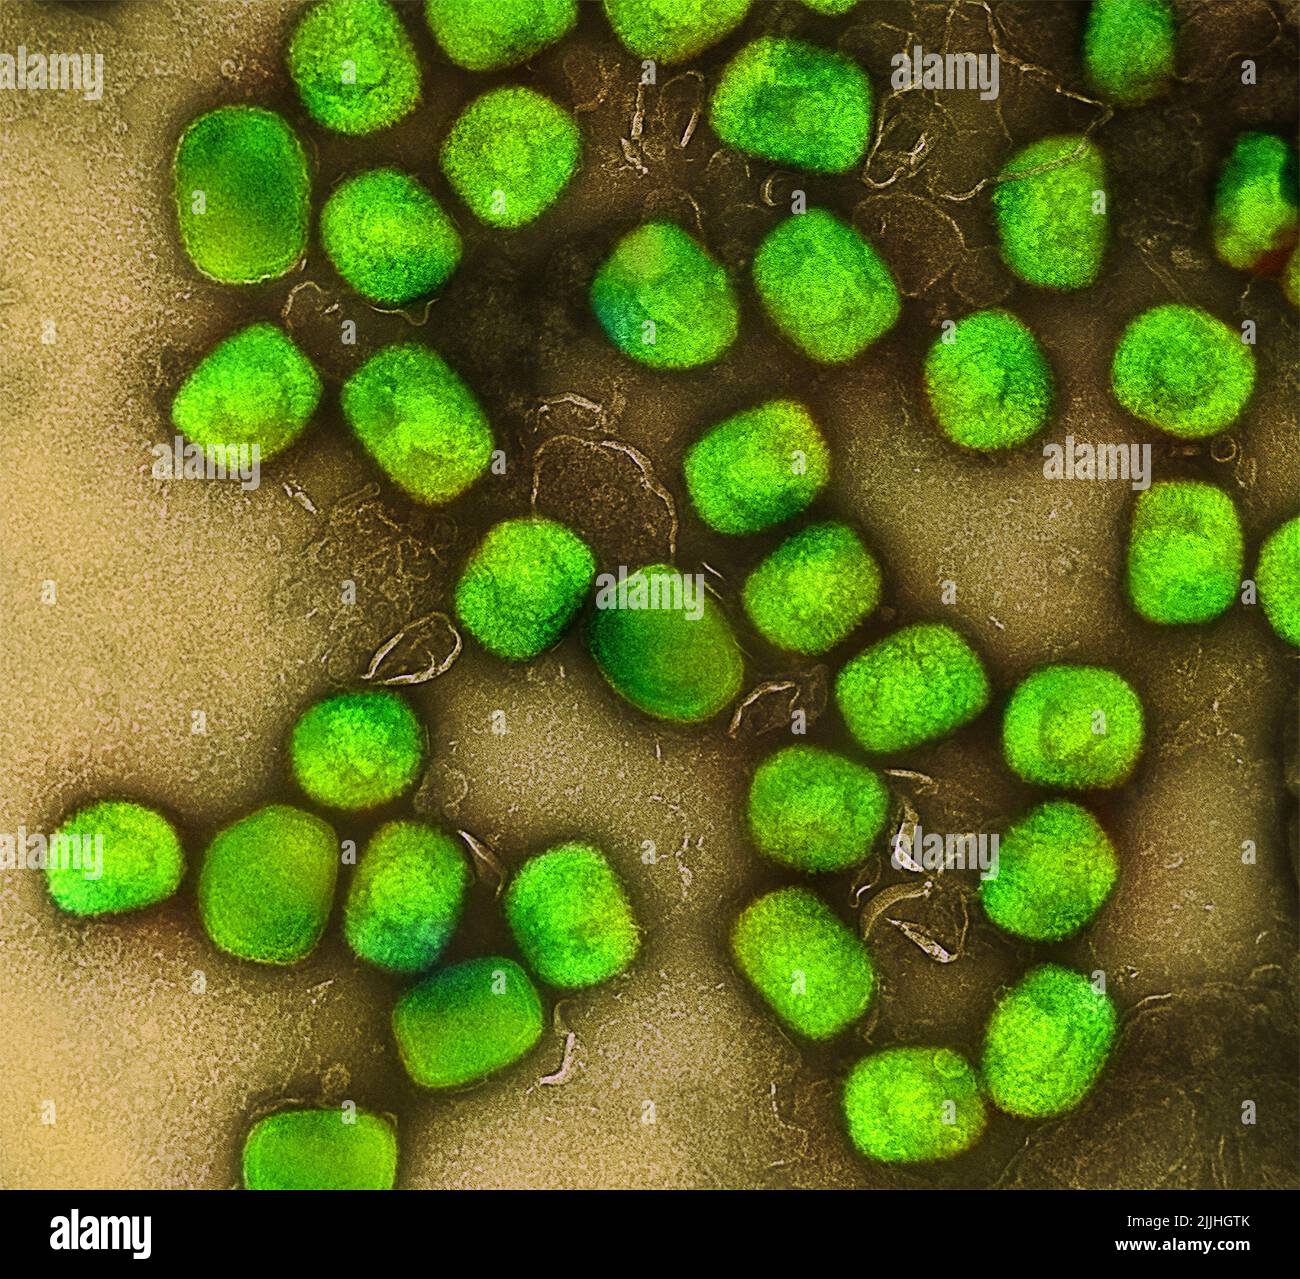 Fort Detrick, United States. 26th July, 2022. A colorized transmission electron micrograph of monkeypox virus particles (green) cultivated and purified from cell culture captured at the NIAID Integrated Research Facility released July 26, 2022, in Fort Detrick, Maryland. Credit: NIAID/NIAID/Alamy Live News Stock Photo